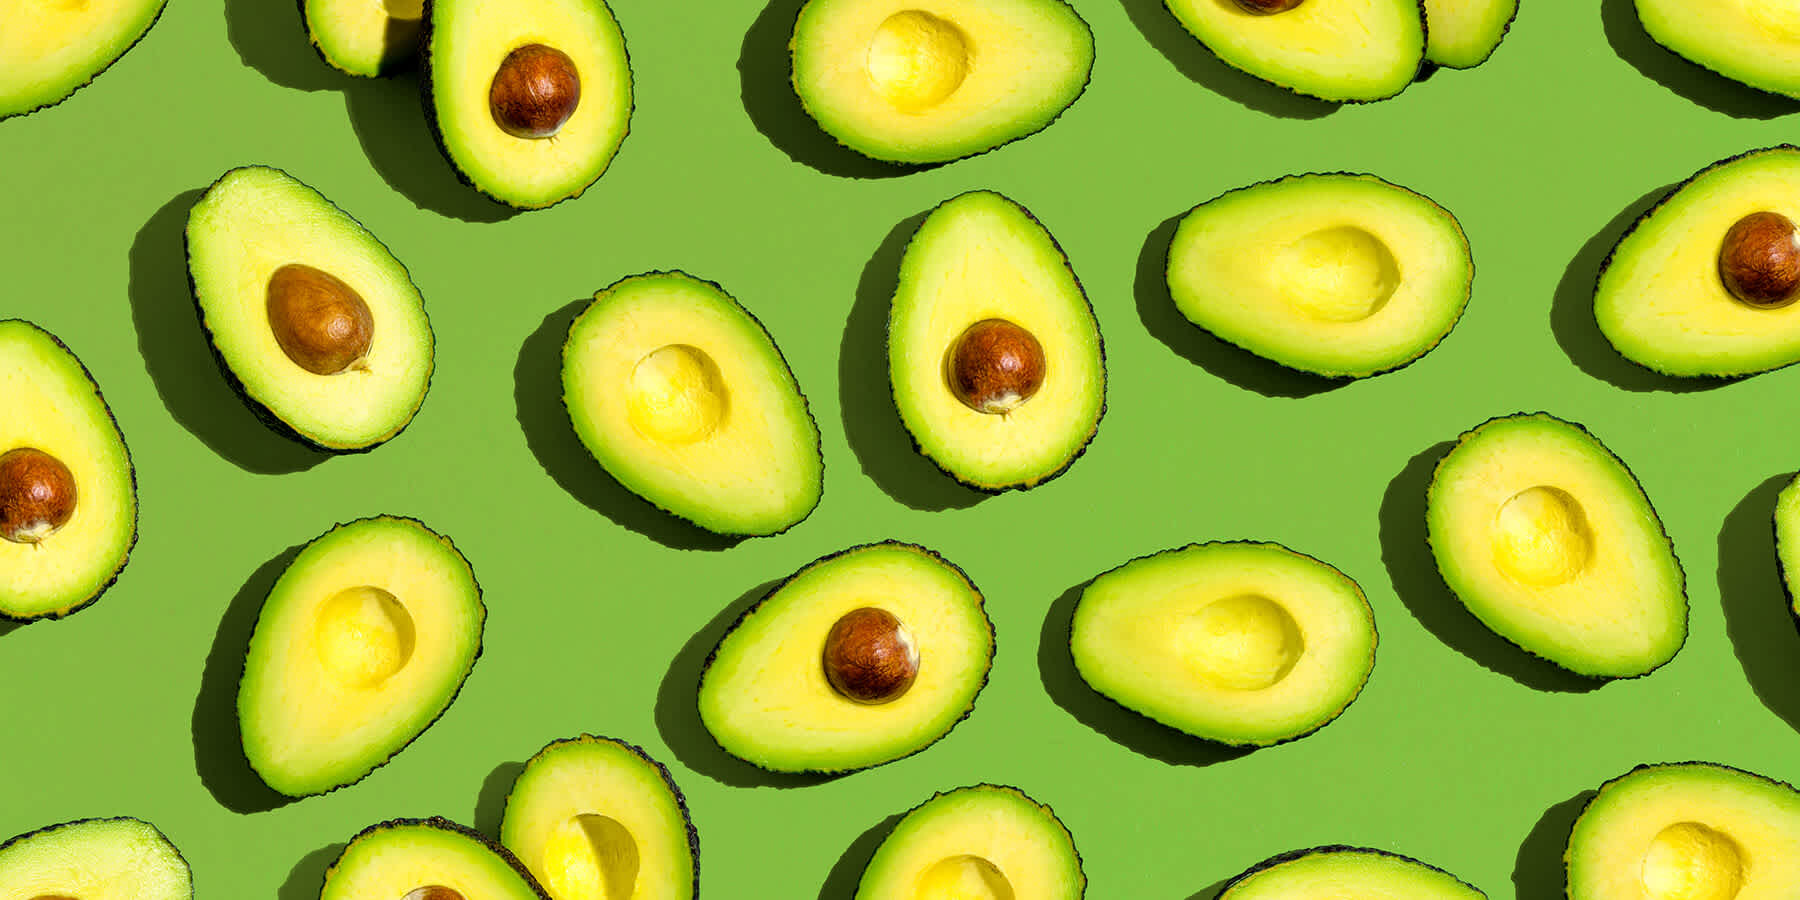 Green background with multiple halved avocados that may be good for weight loss